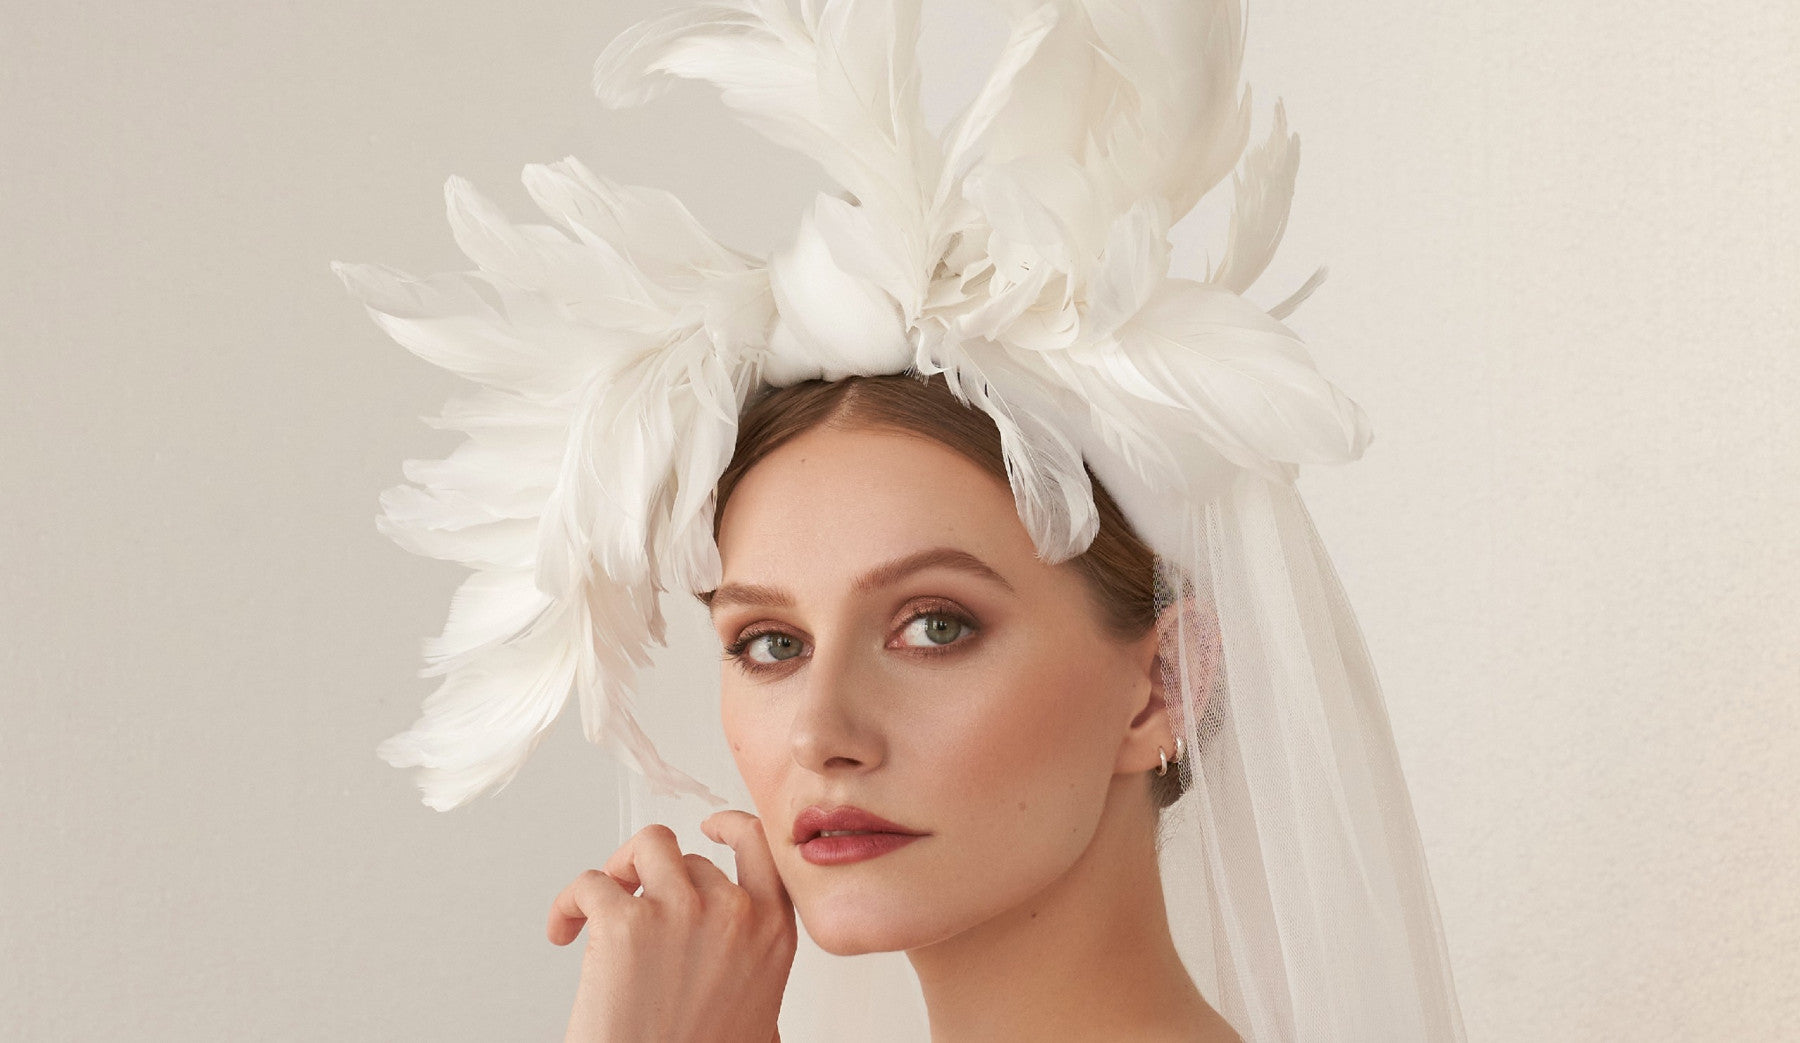 Woman wearing a feather bridal headpiece with veil